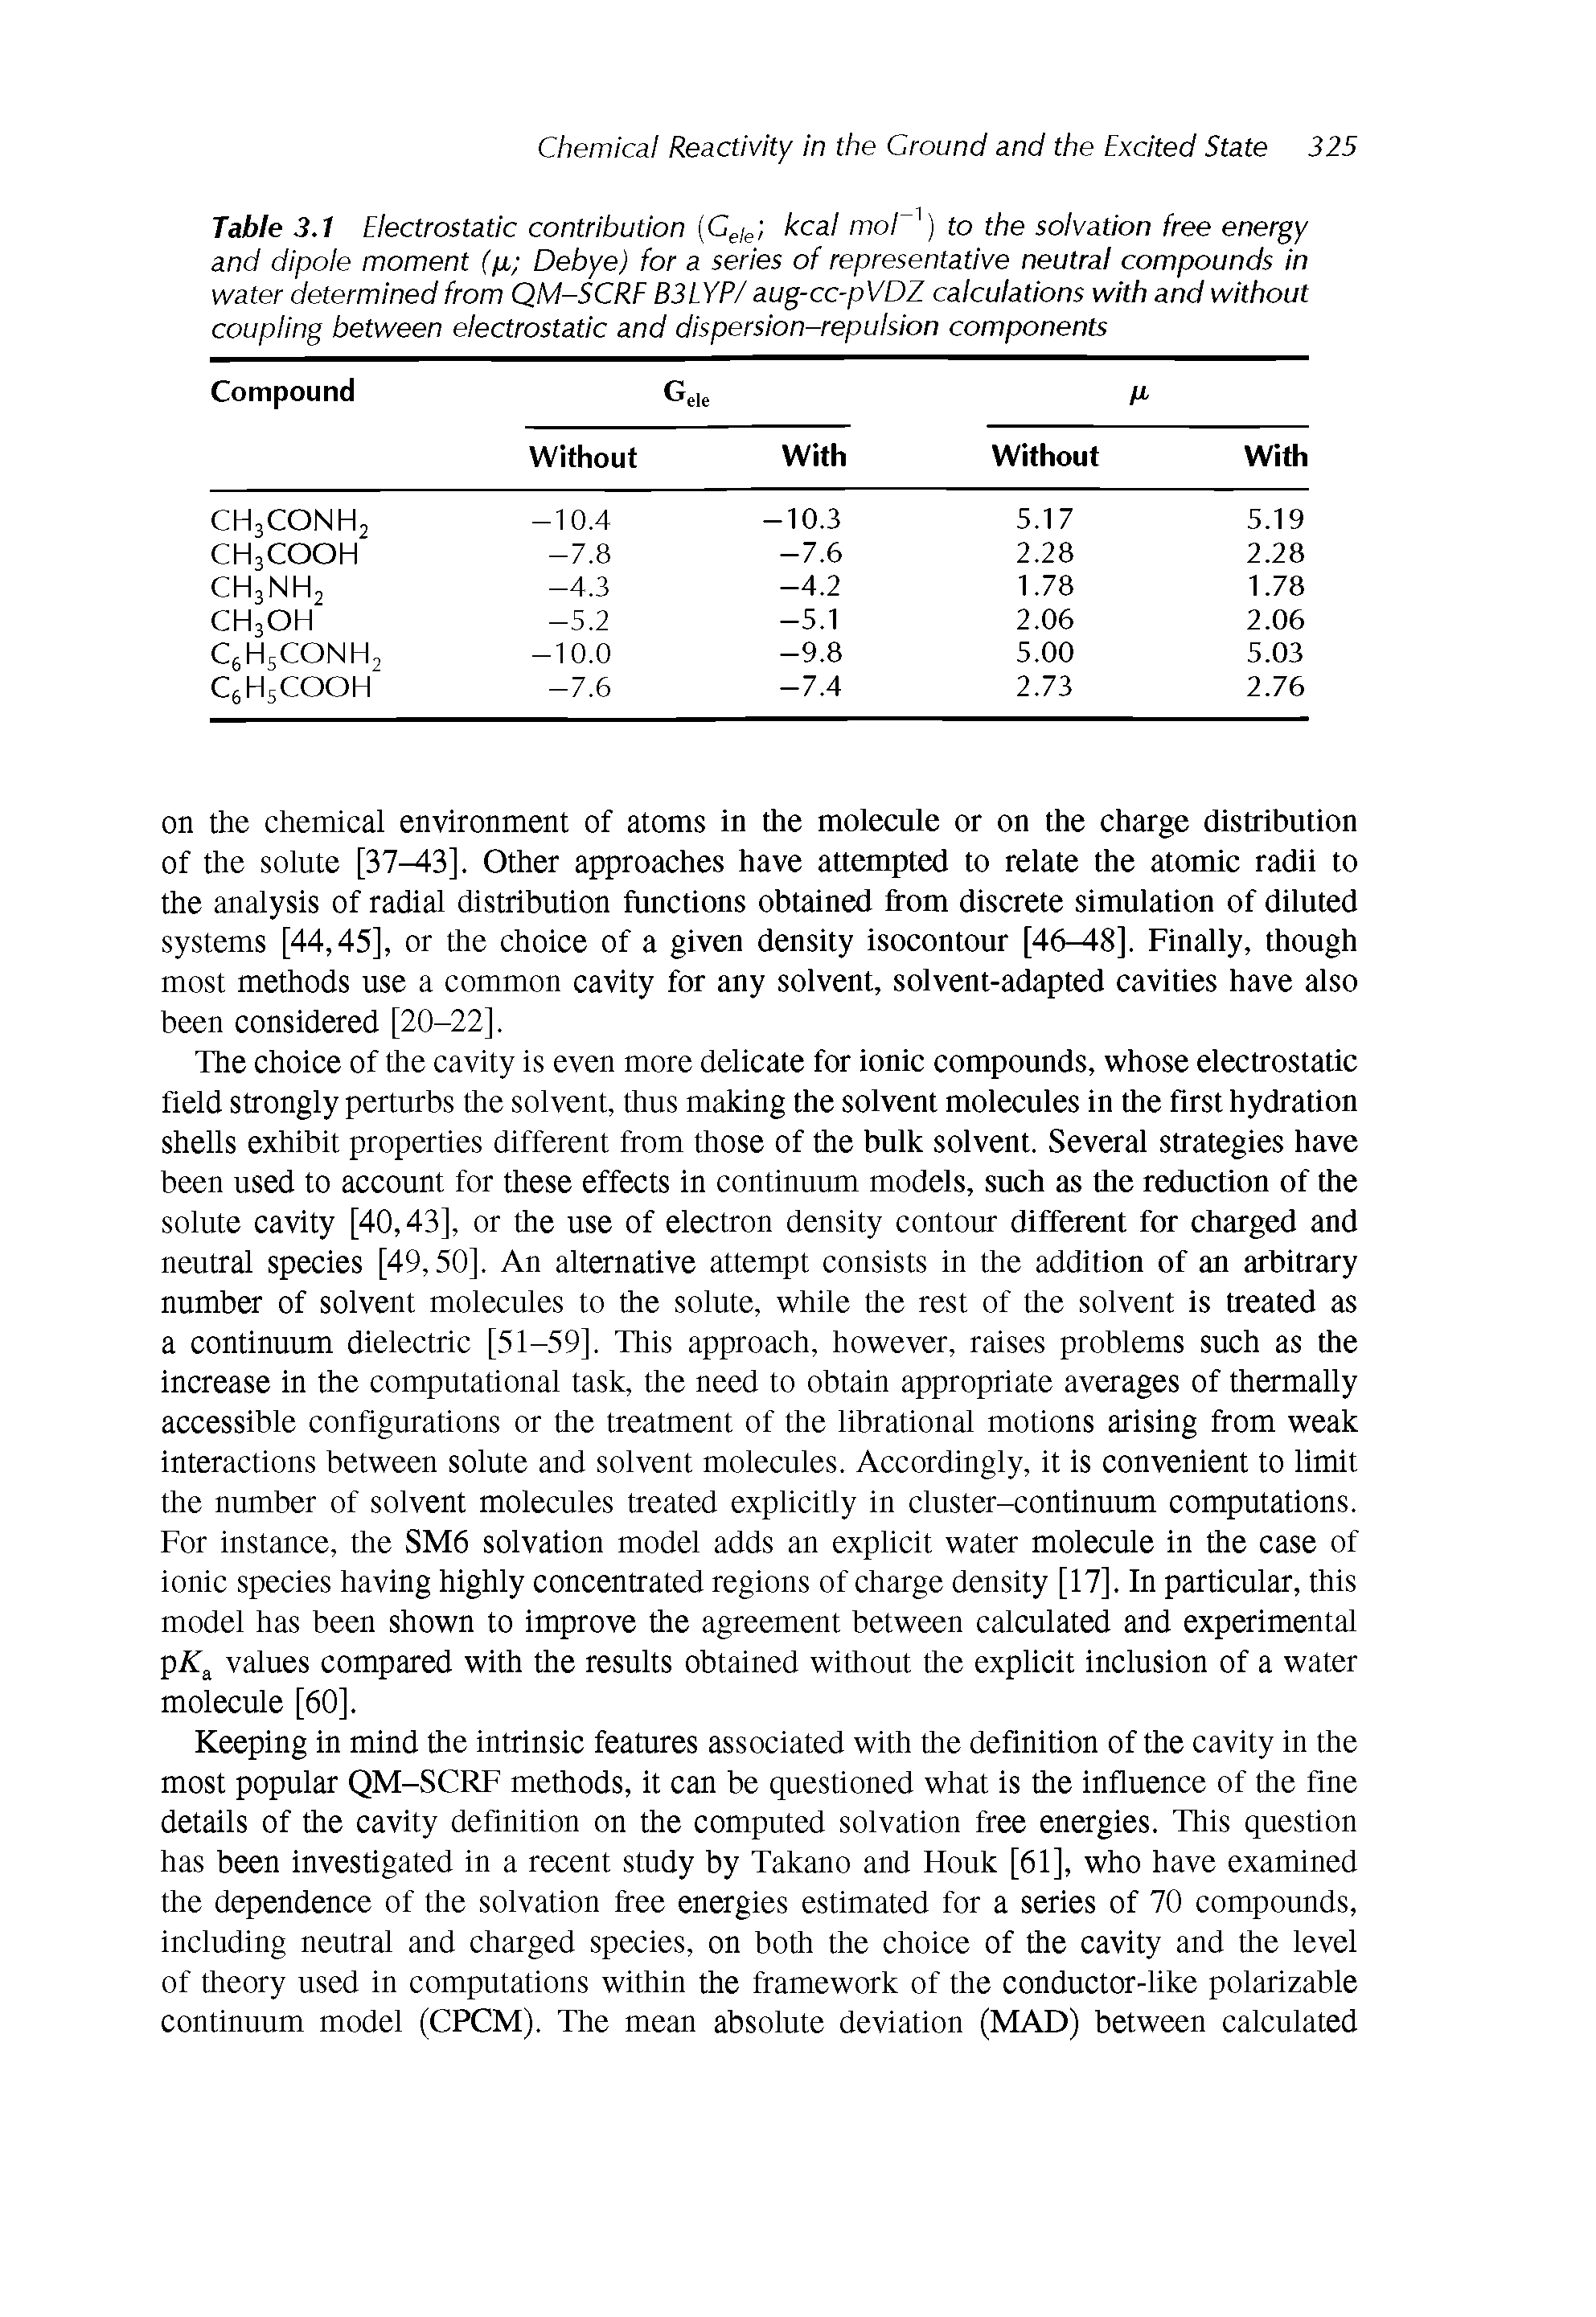 Table 3.1 Electrostatic contribution (Ge/e kcal moC1) to the solvation free energy and dipole moment (p Debye) for a series of representative neutral compounds in water (determined from QM-SCRF B3LYP/ aug-cc-pVDZ calculations with and without coupling between electrostatic and dispersion-repulsion components...